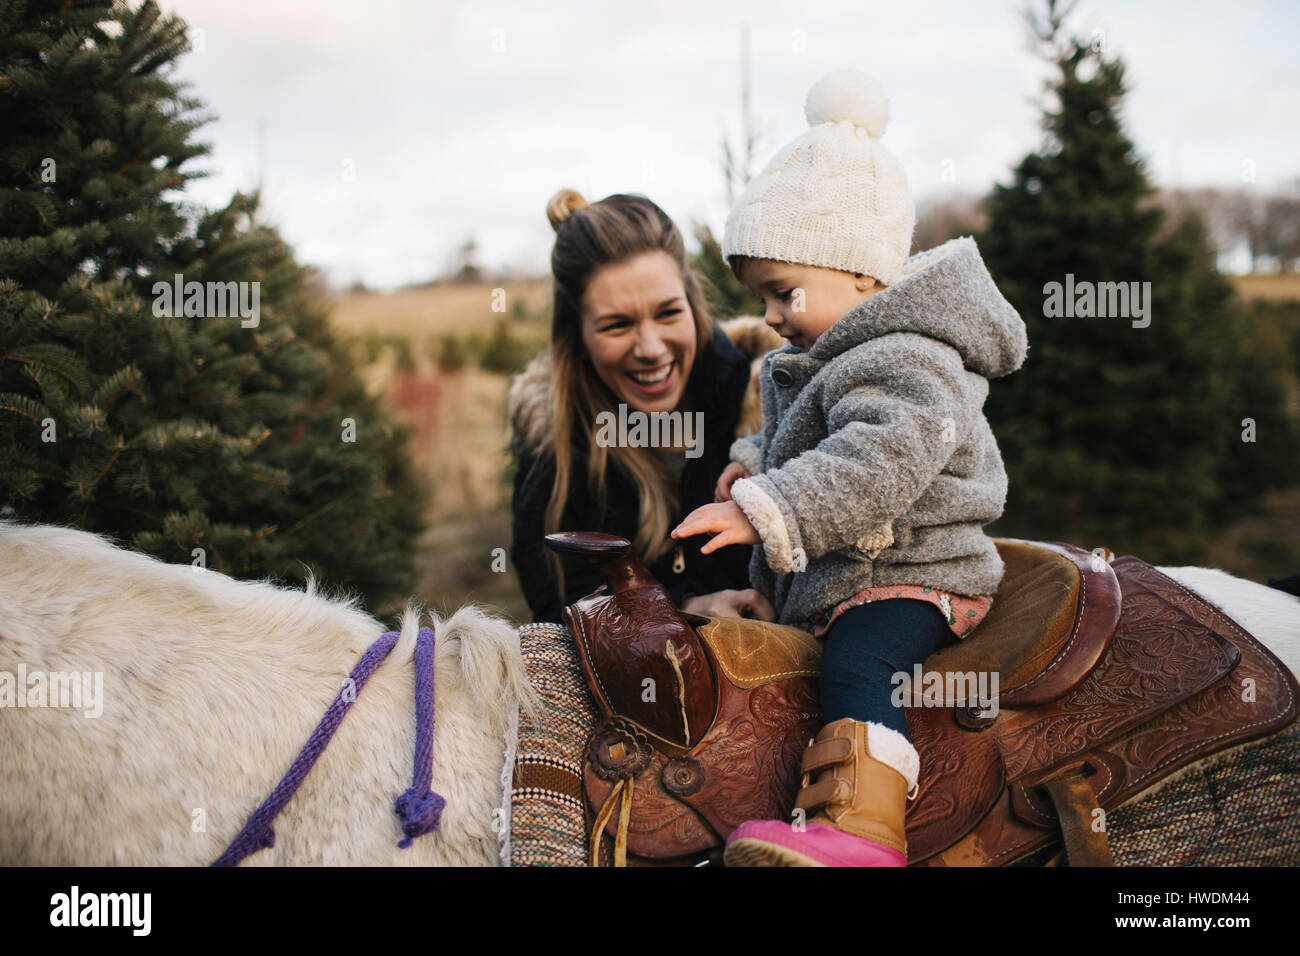 Mother smiling at baby girl riding on horse Stock Photo